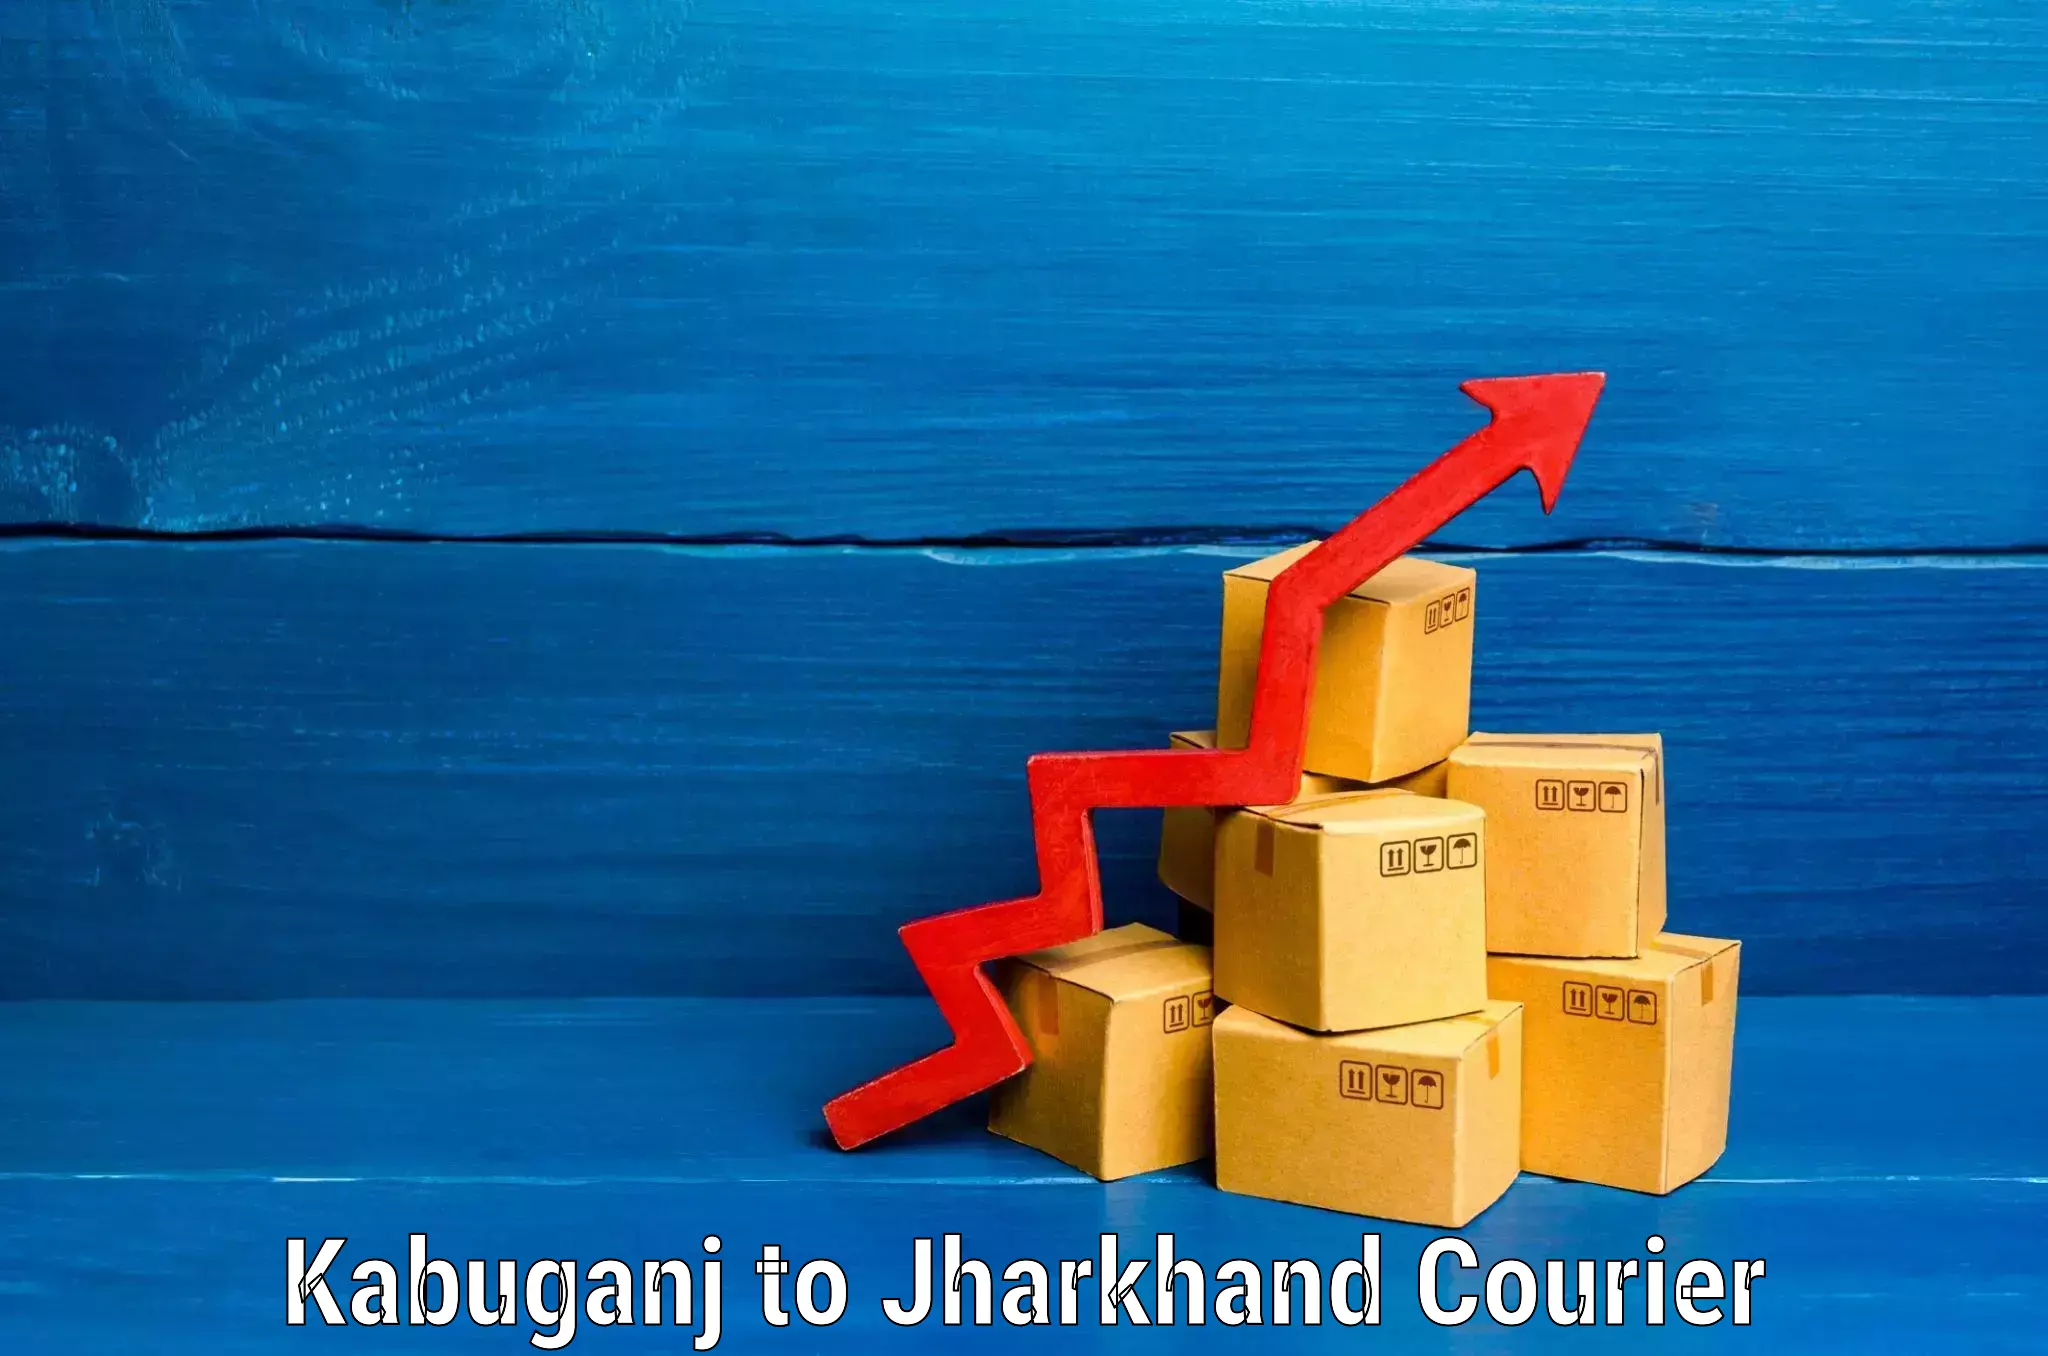 Luggage delivery system in Kabuganj to Jharkhand